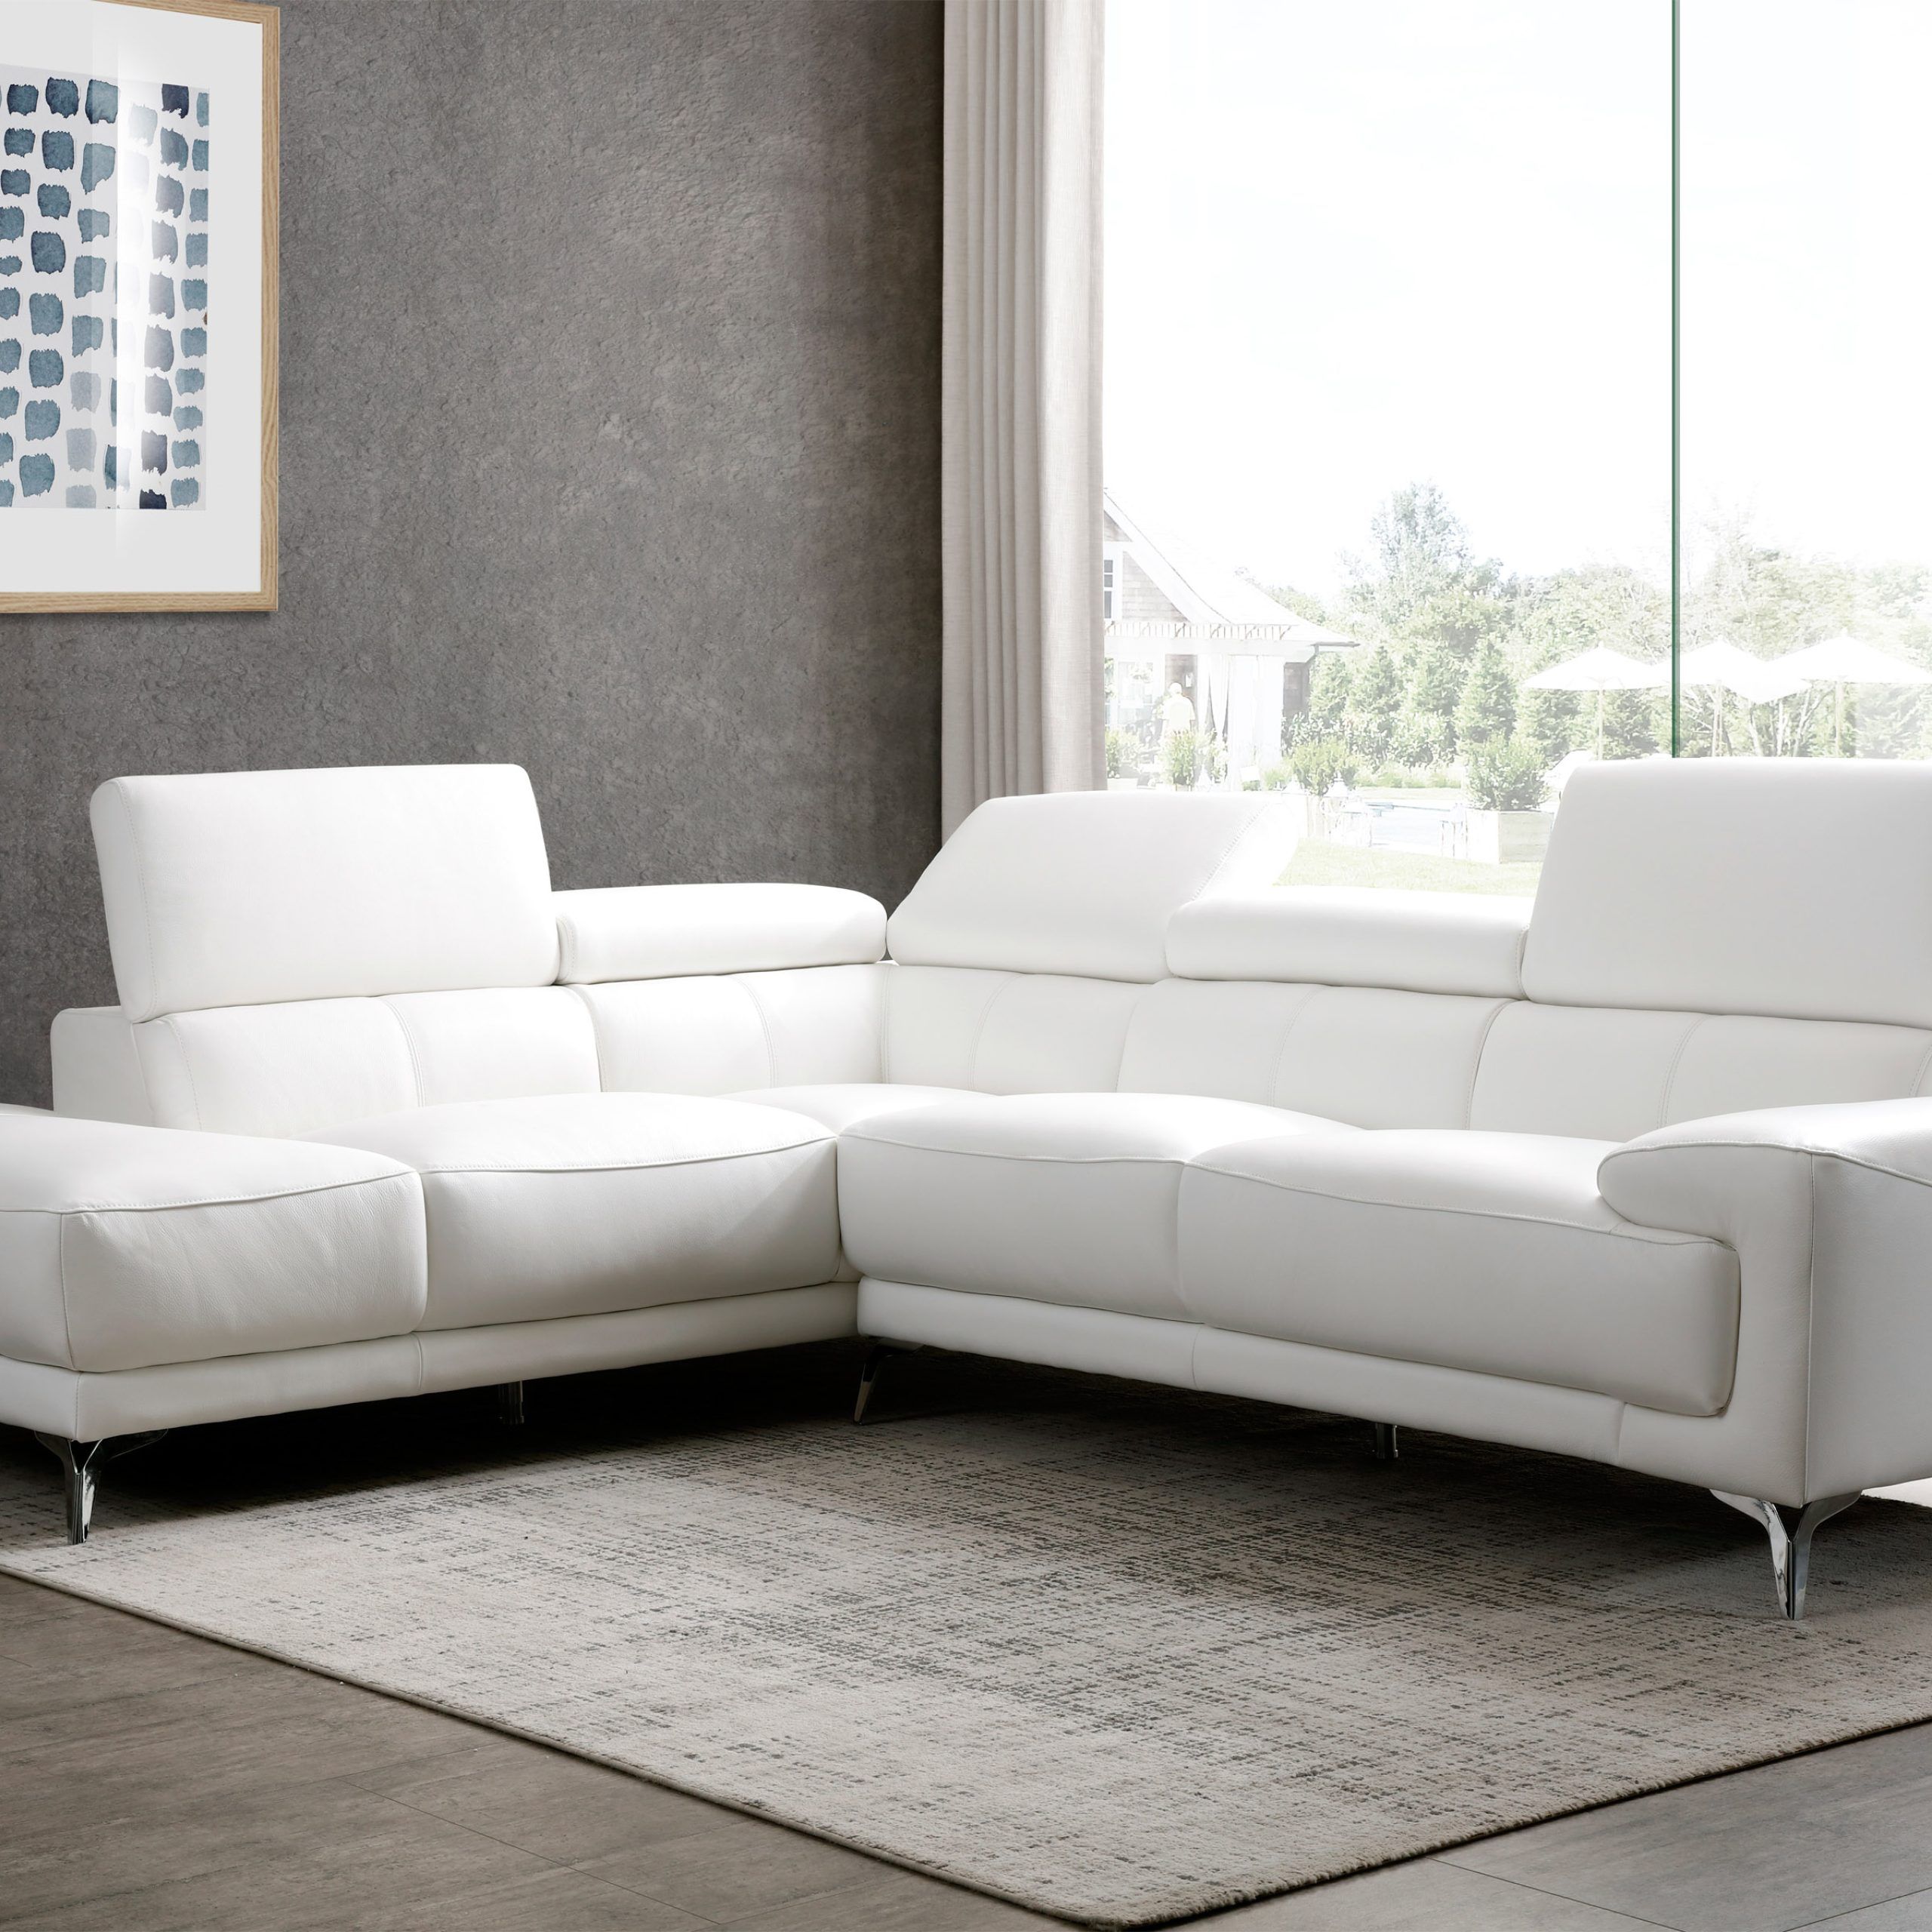 Advanced Adjustable Modern Leather L Shape Sectional Toledo Ohio In Modern L Shaped Sofa Sectionals (Gallery 1 of 20)